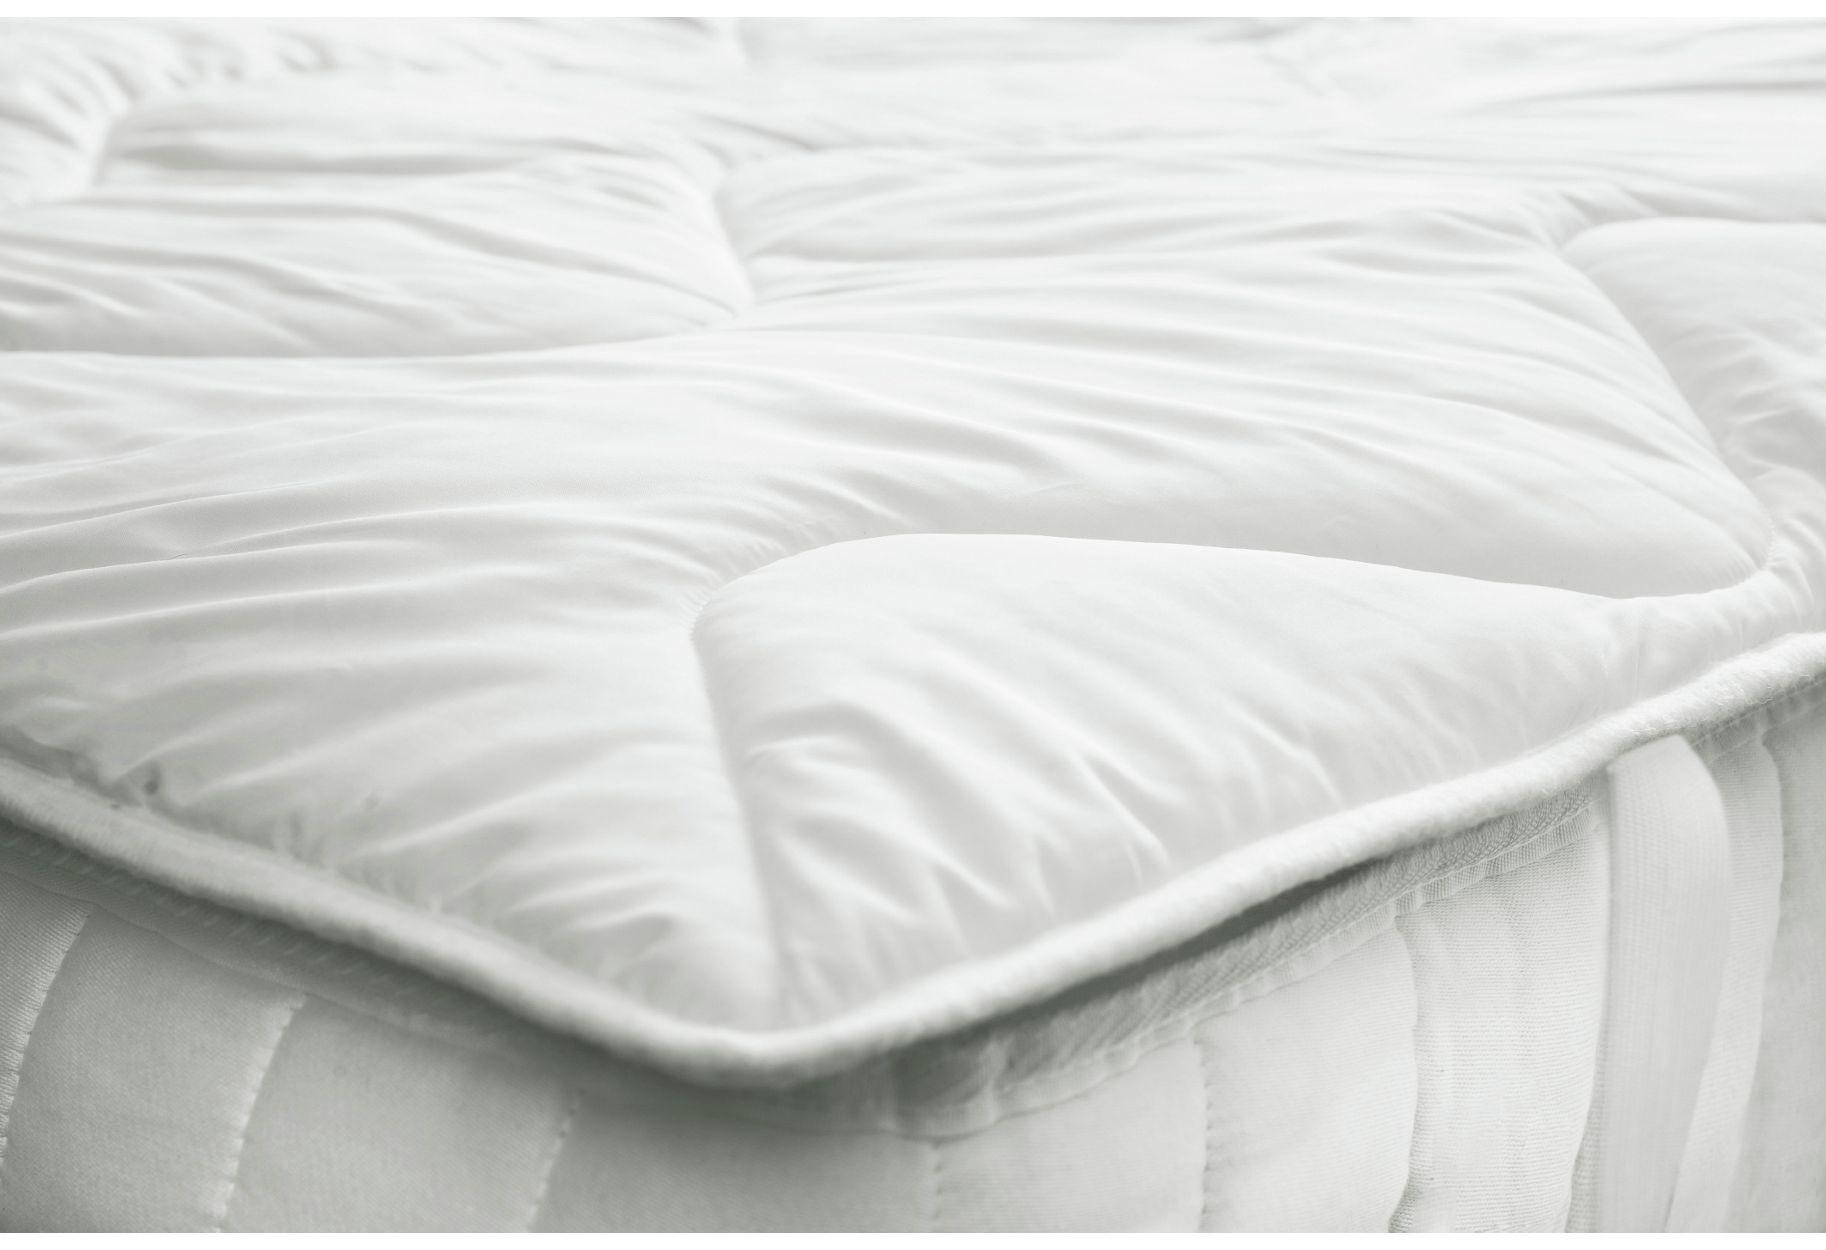 Buy Dreamland Electric blankets at Argos.co.uk - Your Online Shop for ...